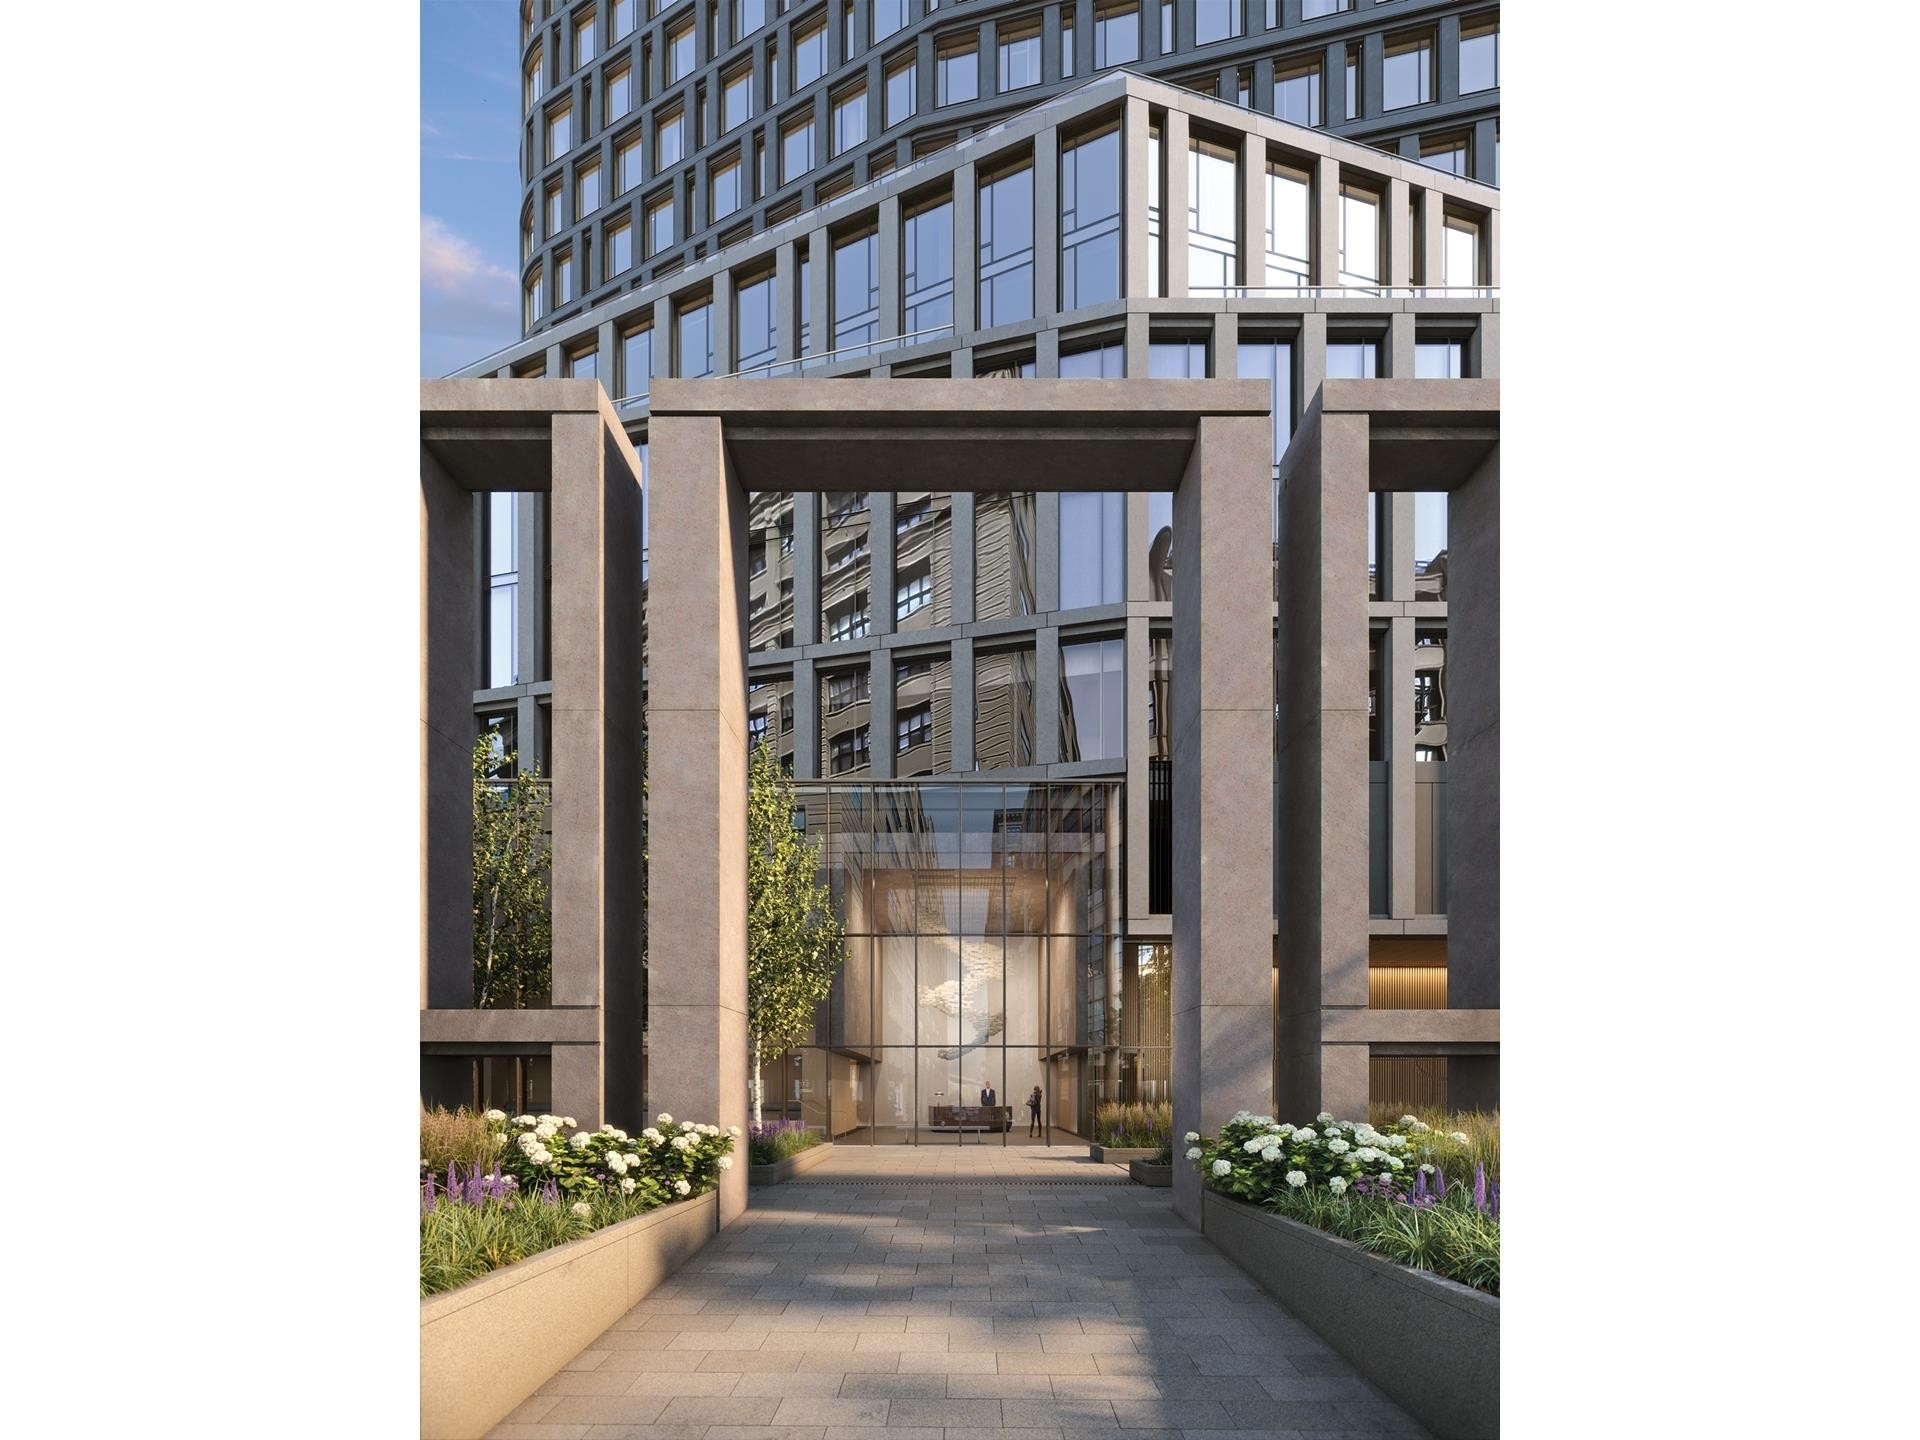 12. Condominiums for Sale at Olympia Dumbo, 30 FRONT ST, 23A Brooklyn, NY 11201